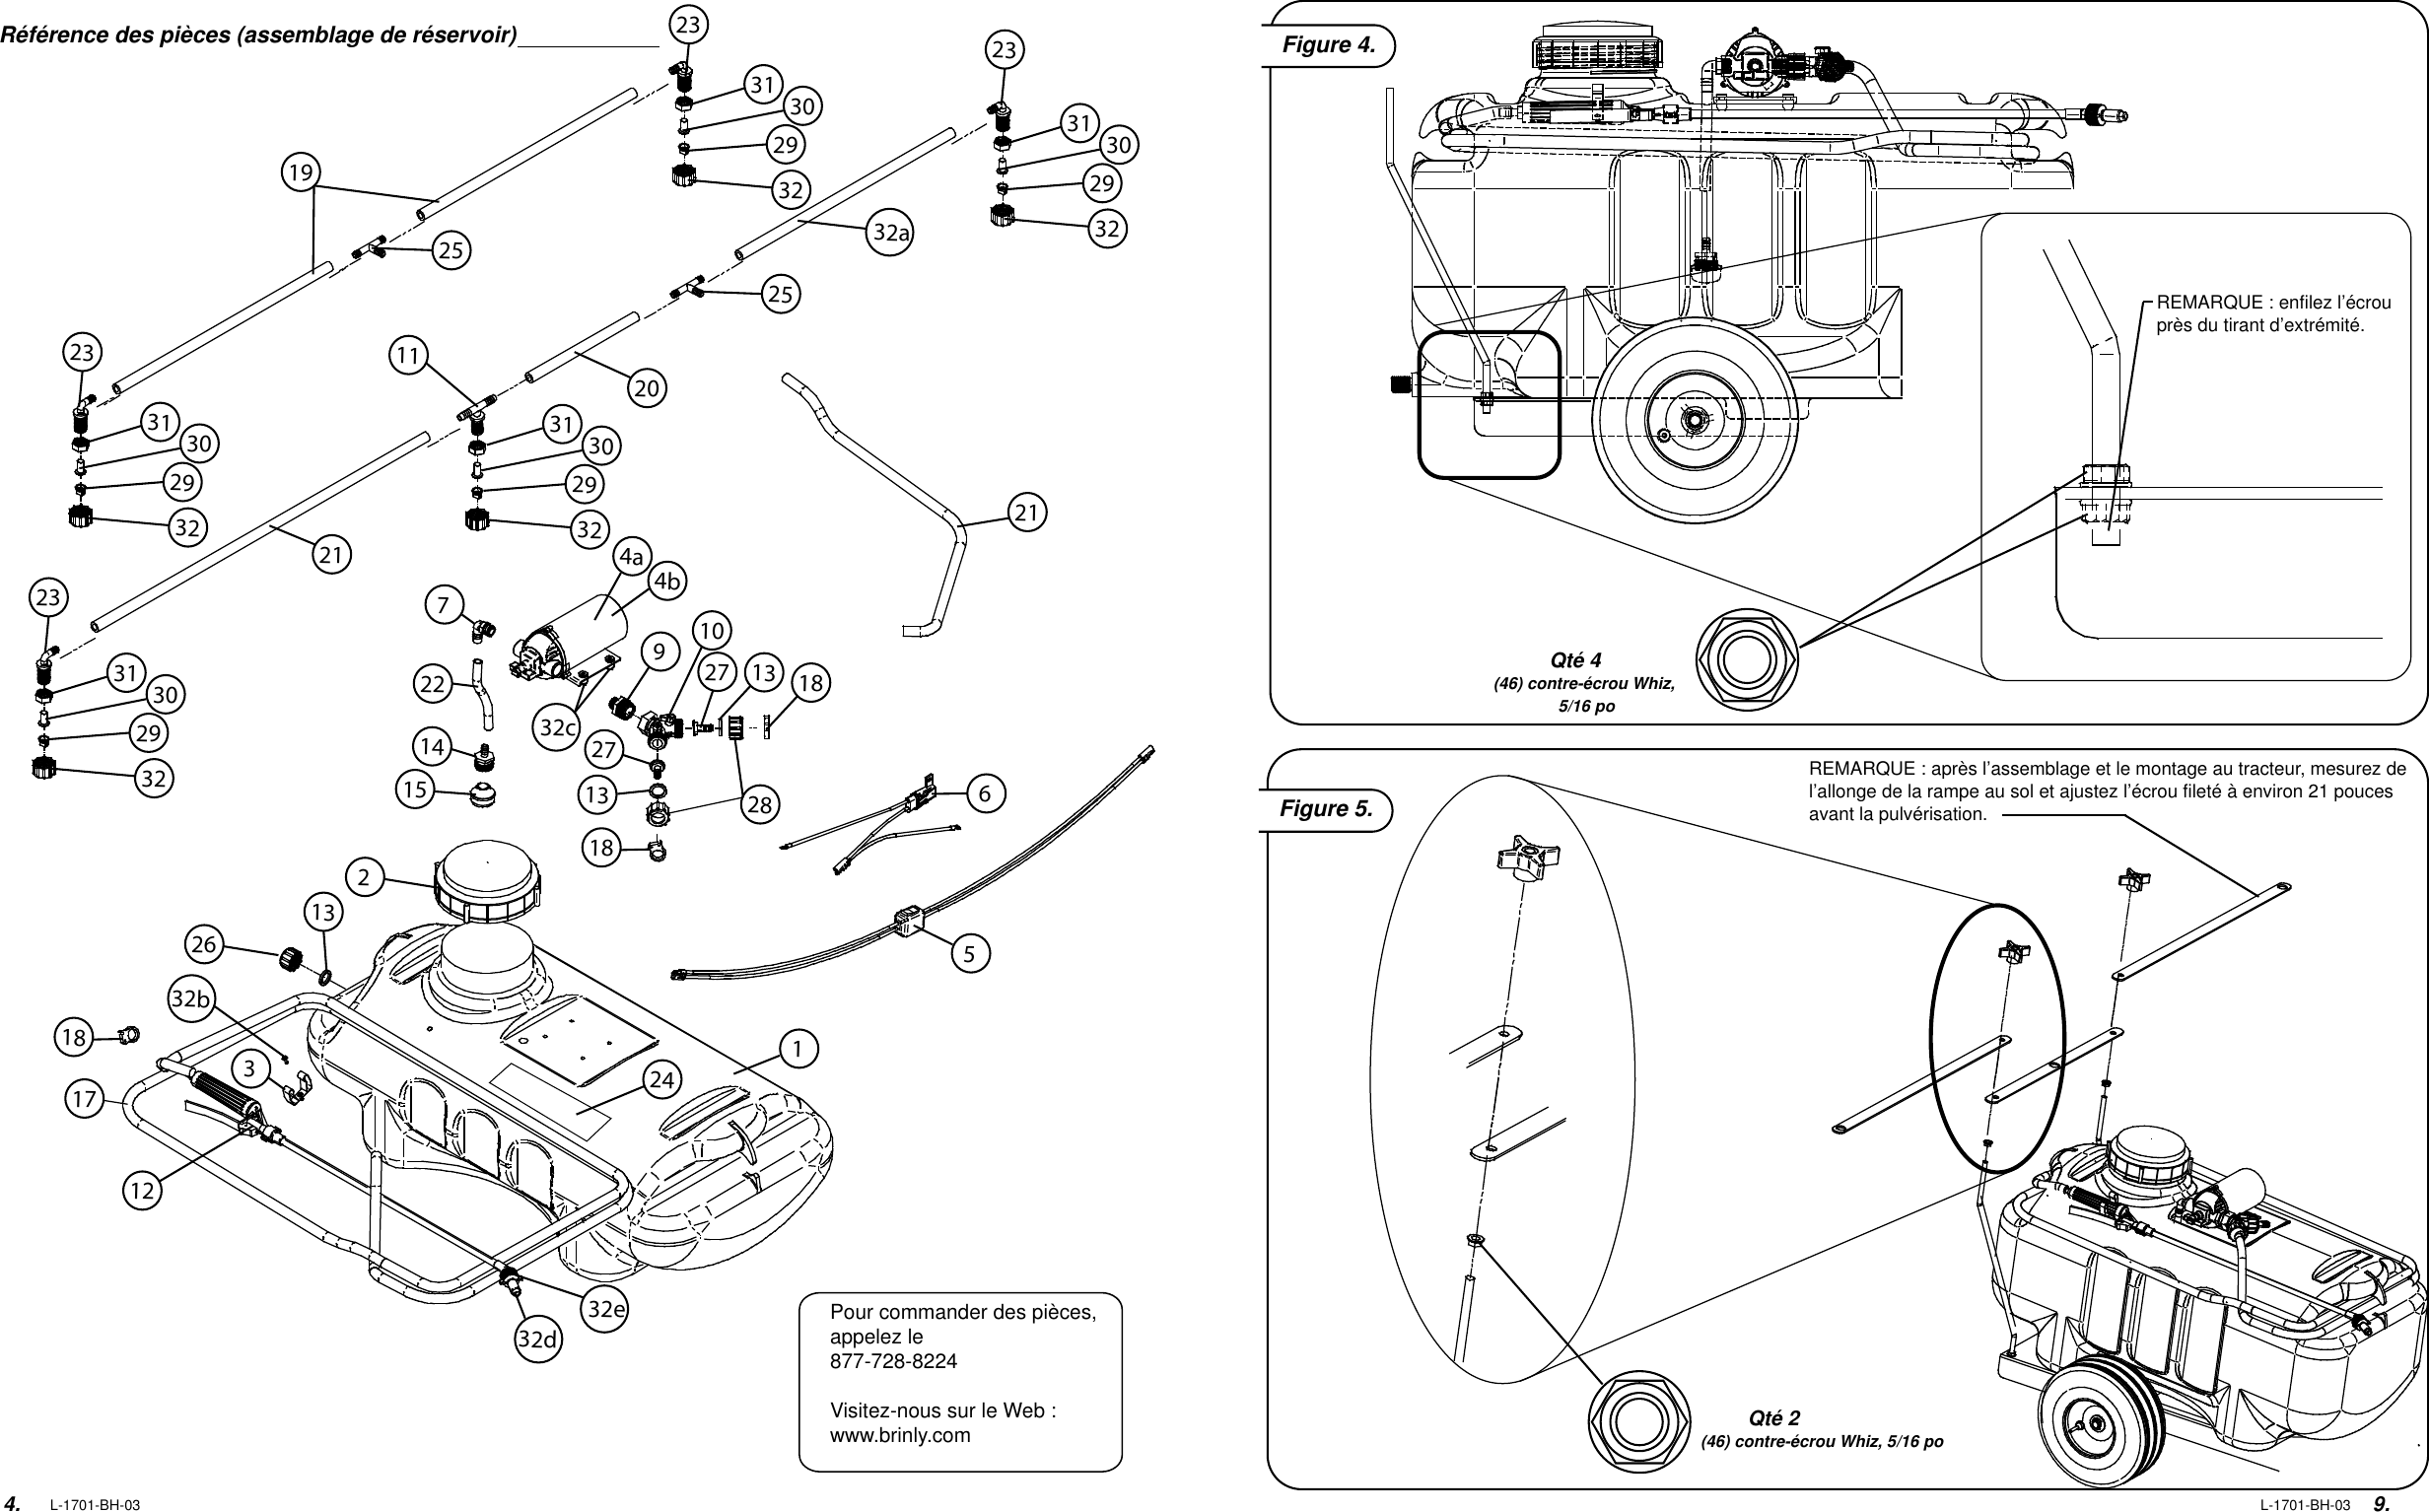 Page 9 of 10 - Brinly-Hardy Brinly-Hardy-Brinly-Hardy-Lawn-Aerator-15-And-25-Gallon-Tow-Behind-Lawn-Sprayer-Users-Manual- 12-1  Brinly-hardy-brinly-hardy-lawn-aerator-15-and-25-gallon-tow-behind-lawn-sprayer-users-manual